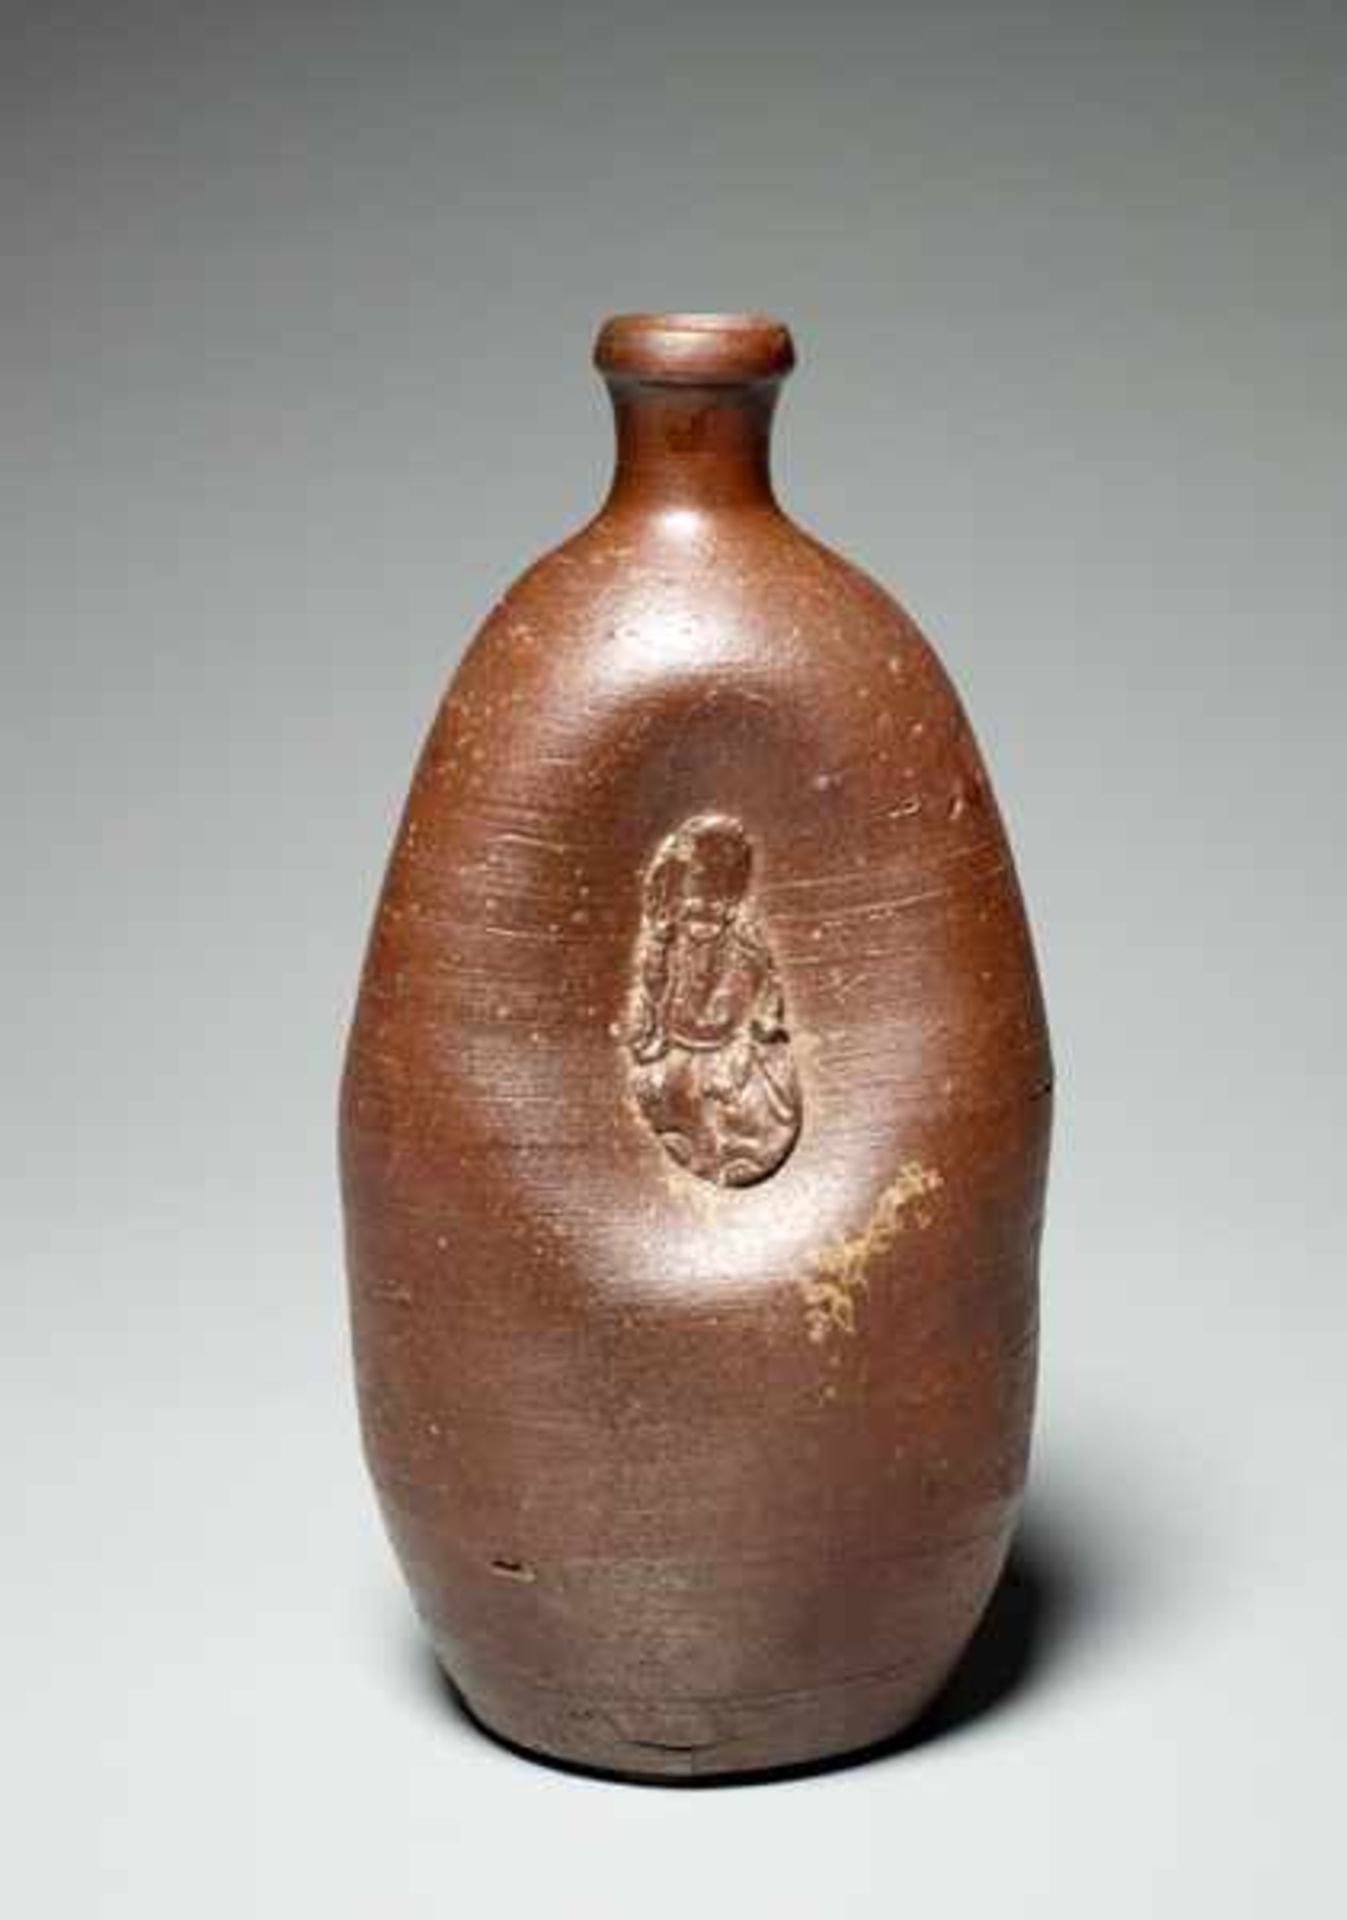 SAKE BOTTLE WITH GOD OF LONG LIFE Glazed ceramic. Japan, ca. 19th cent. to Meiji and laterA